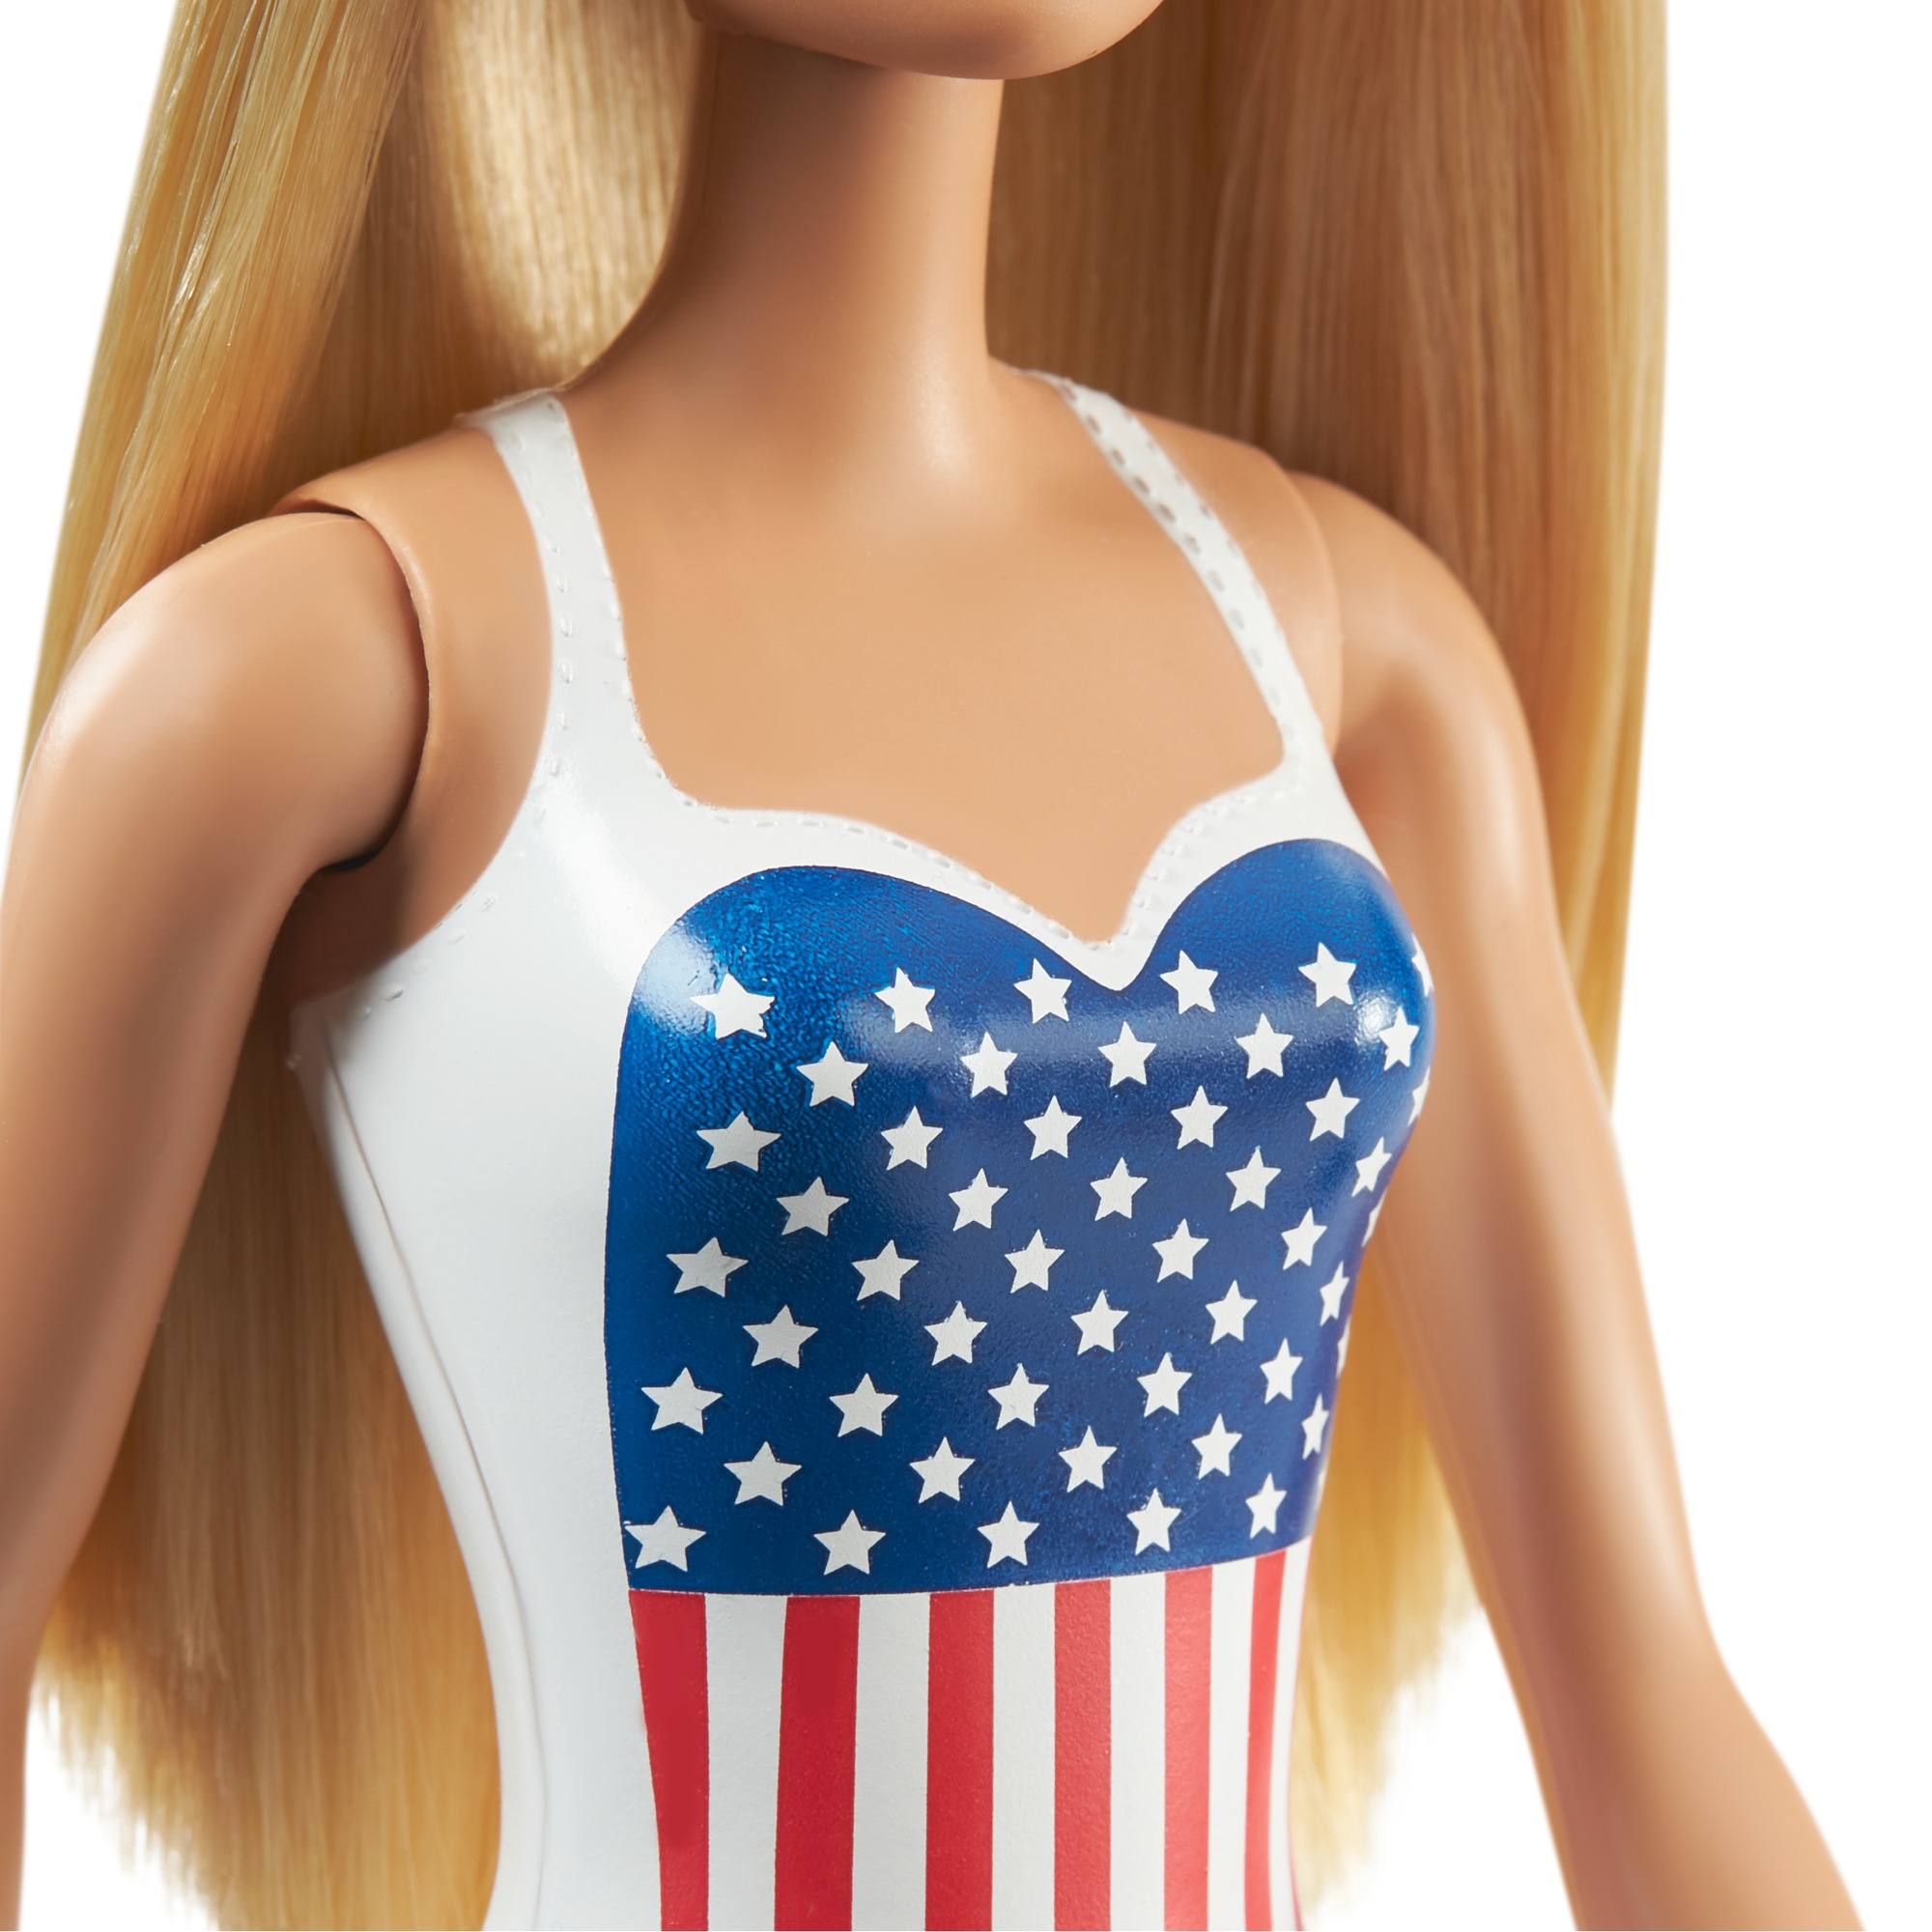 Barbie Swimsuit Beach Doll with Blonde Hair & American Flag Suit - image 4 of 5